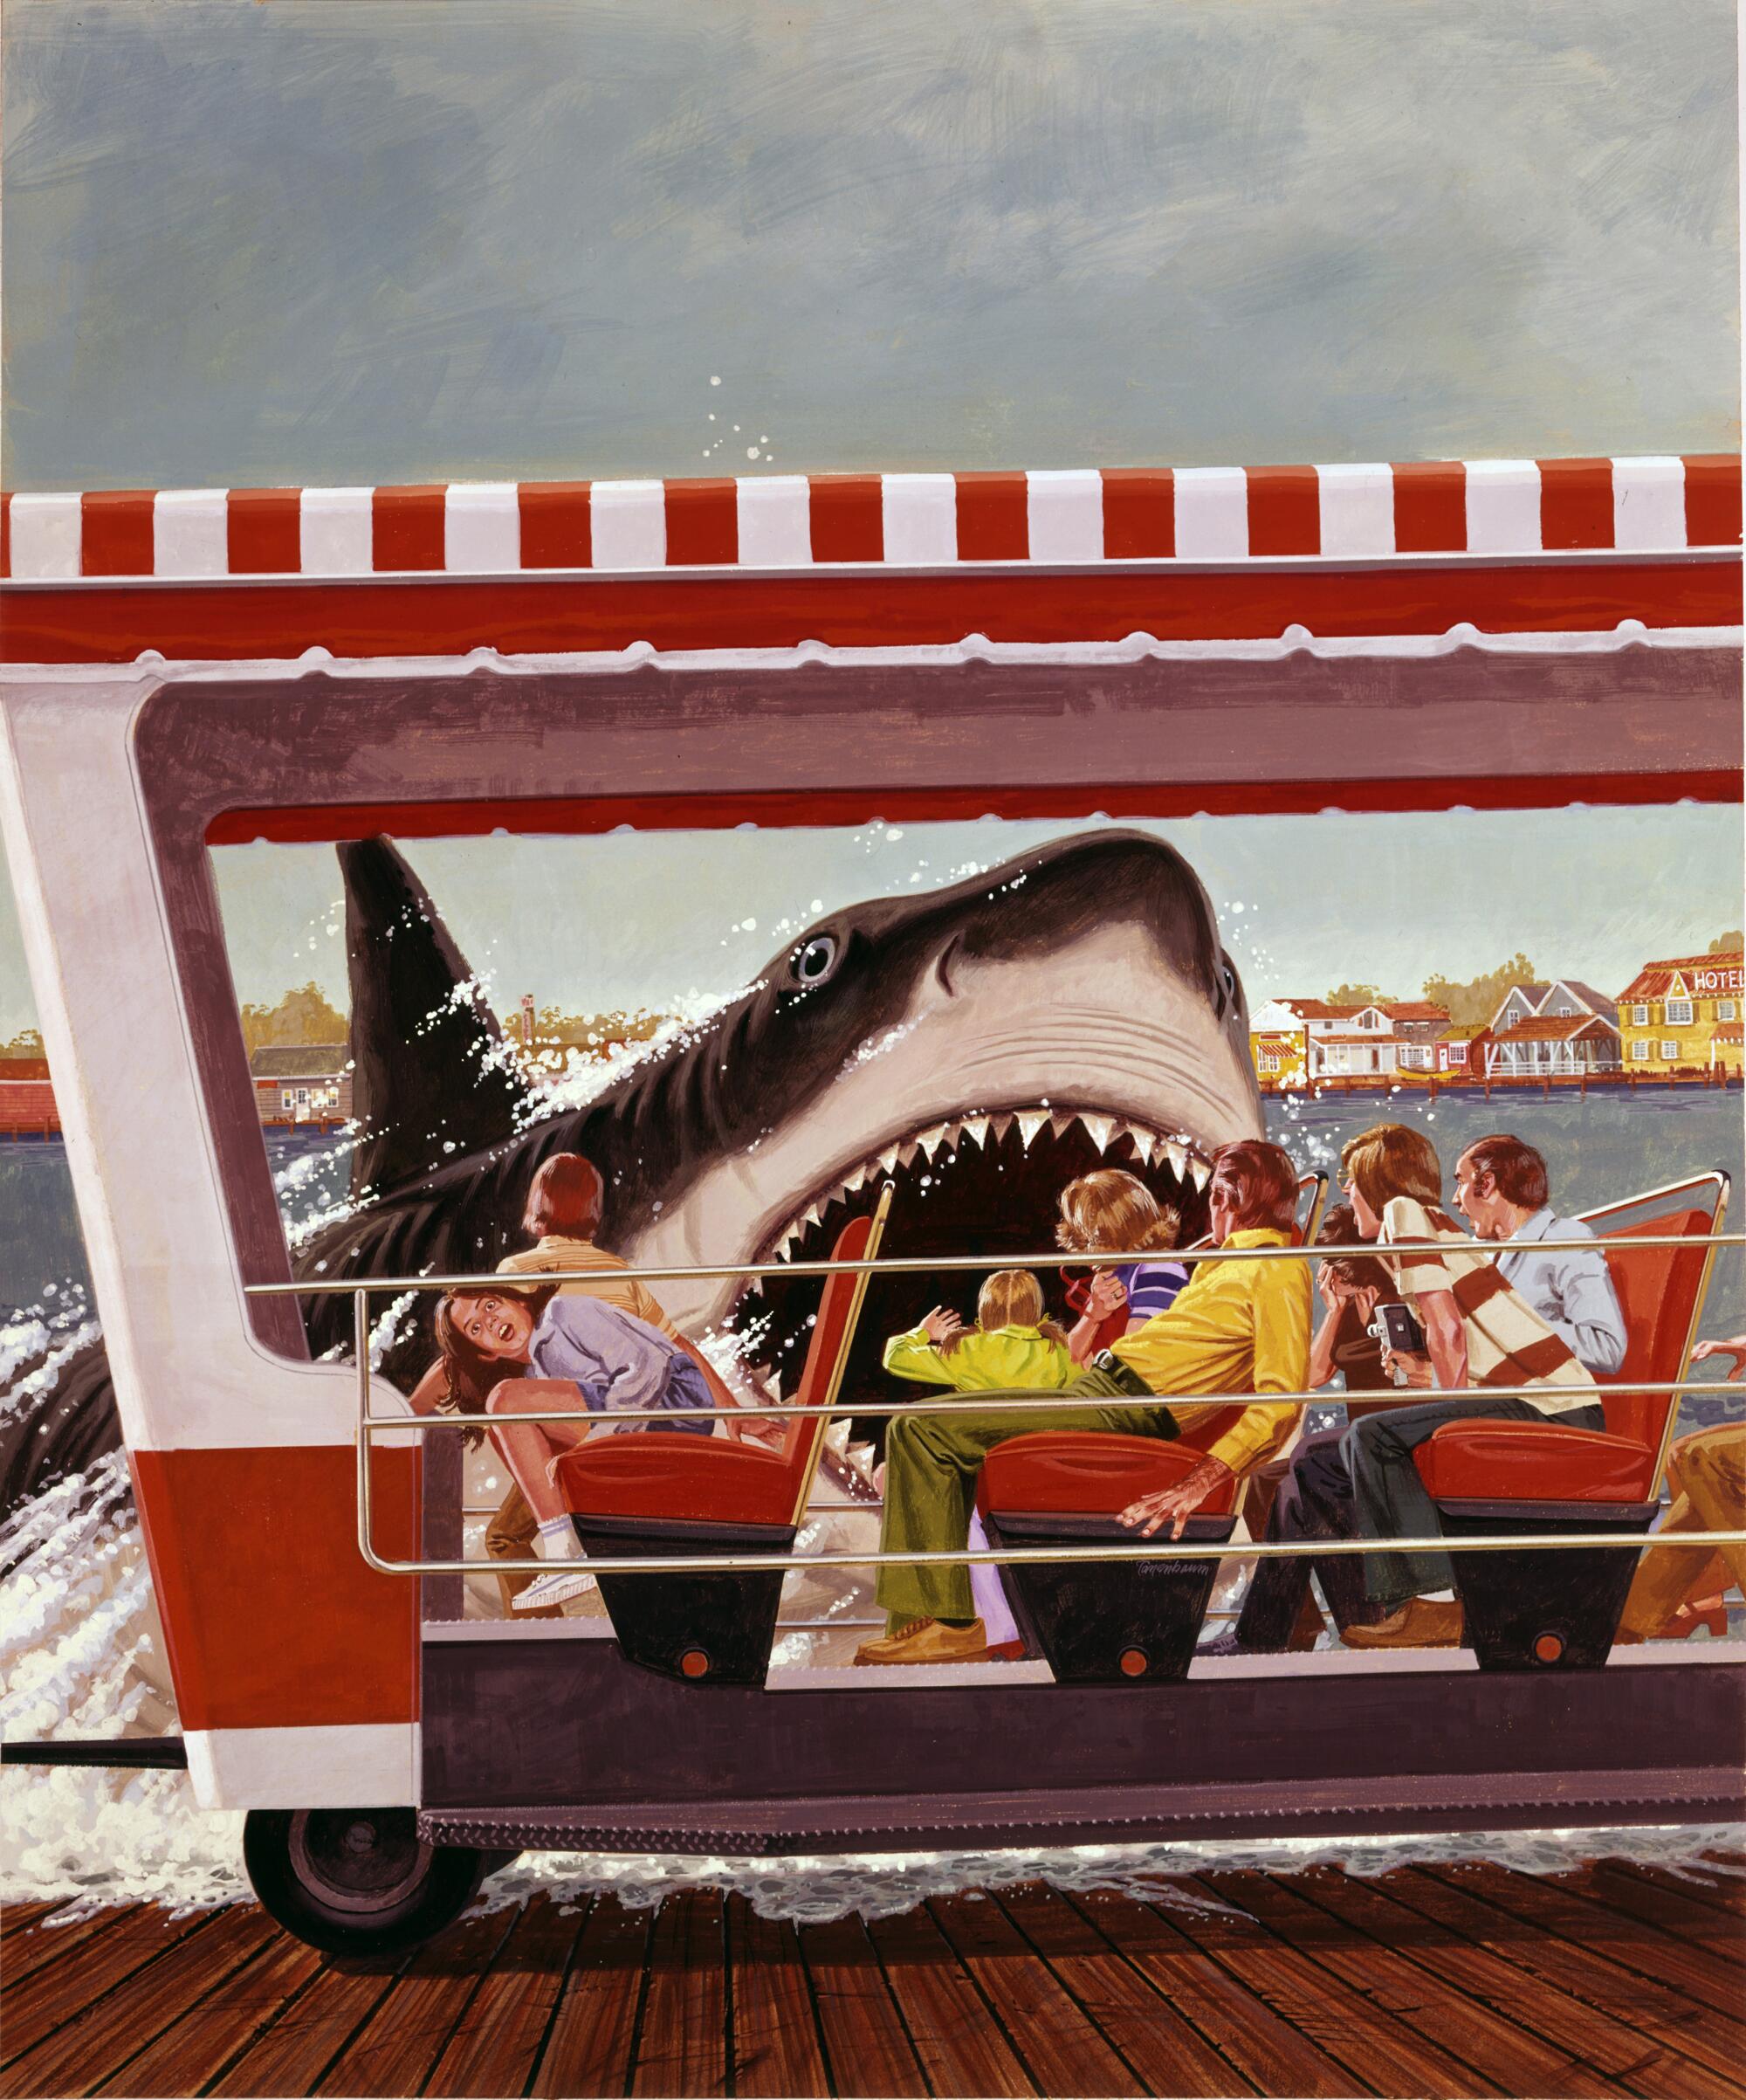 An artist's rendering of a shark's open jaws on the far side of a tram car.